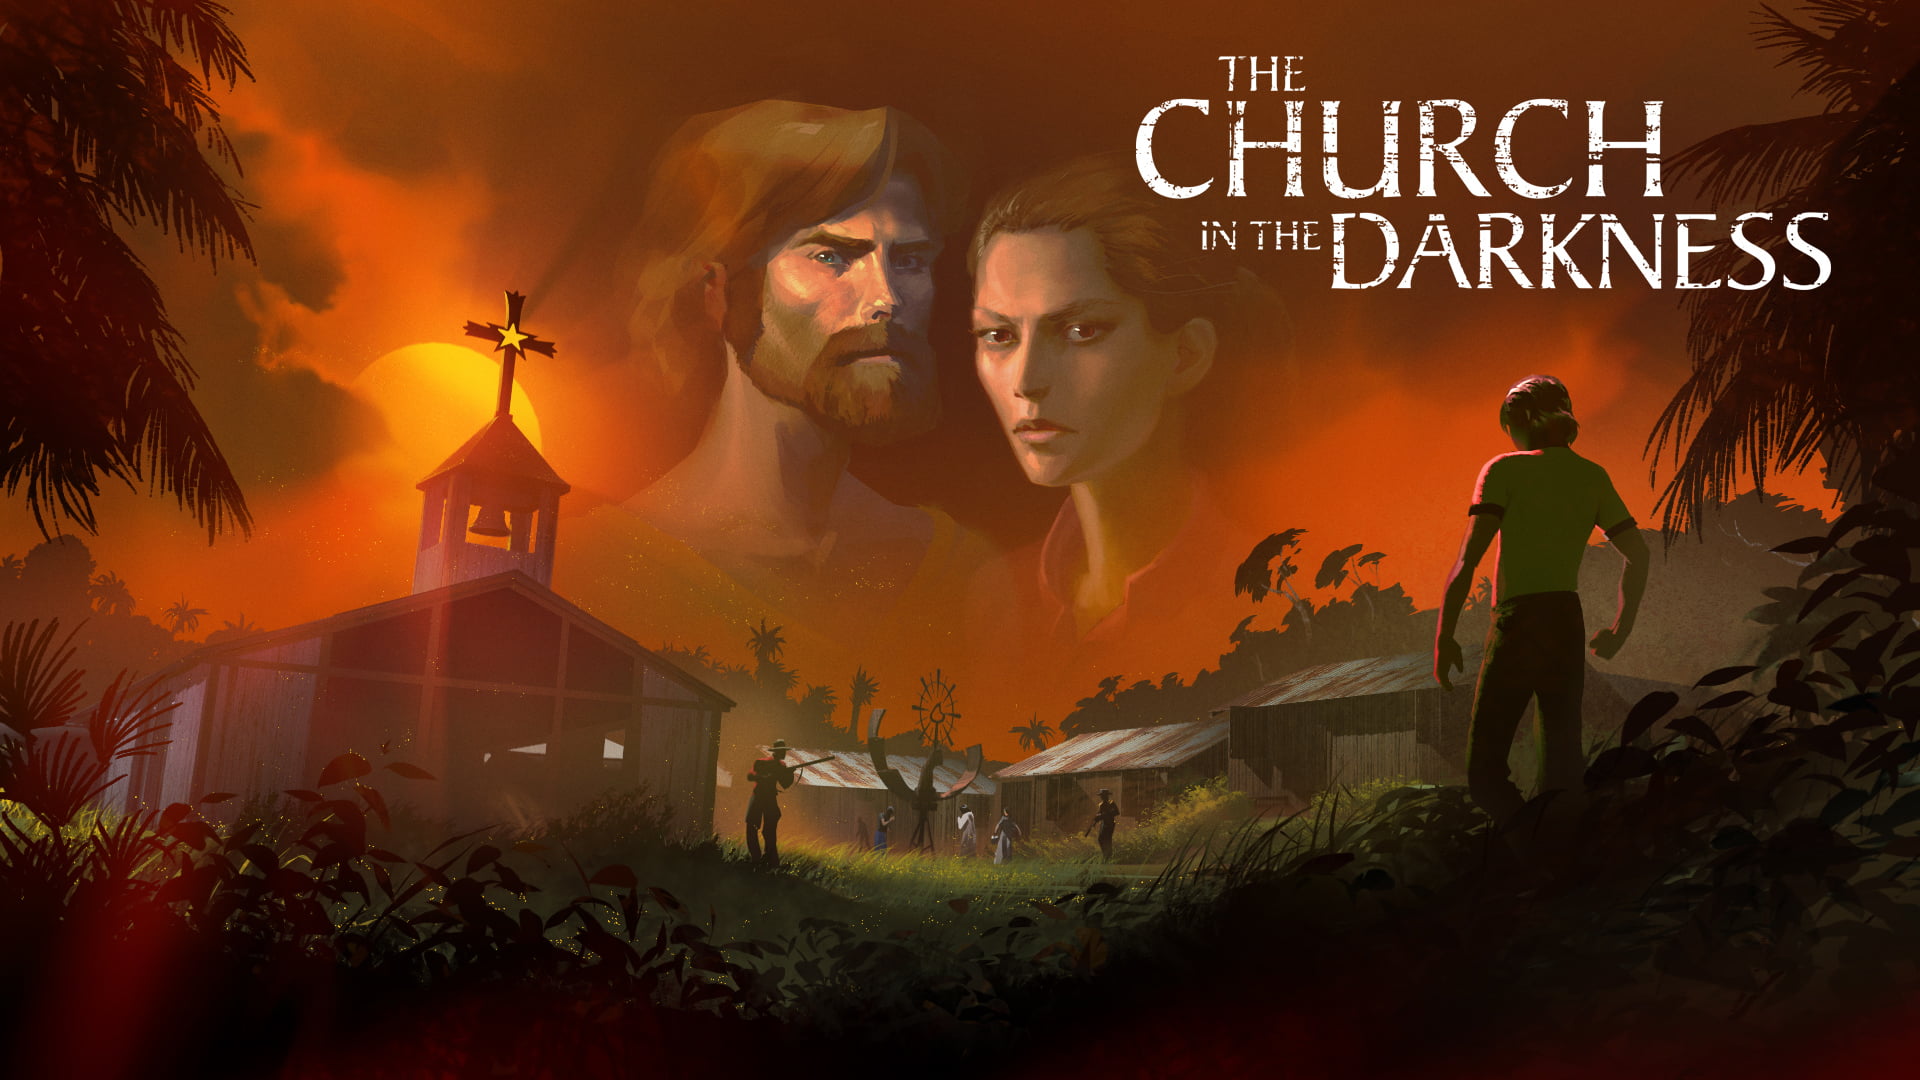 The church in the darkness - review | the church in the darkness | facebook | the church in the darkness facebook